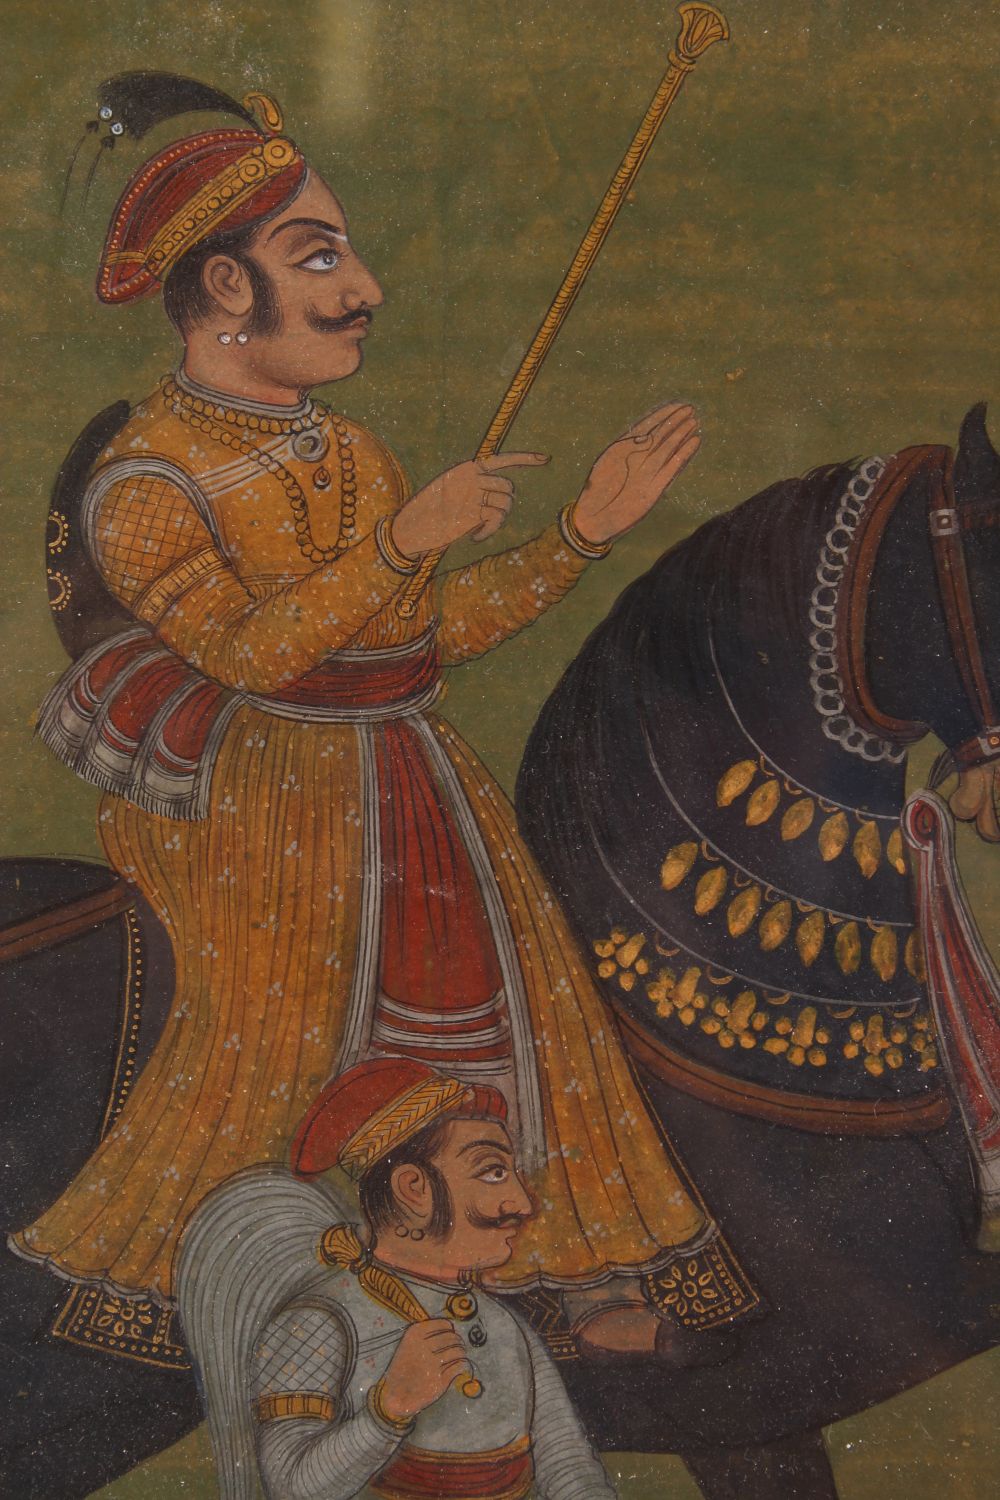 A FINE 18TH - 19TH CENTURY MUGHAL INDIAN MINIATURE PAINTING OF NOBLEMAN UPON HORSEBACK, framed - Image 3 of 7